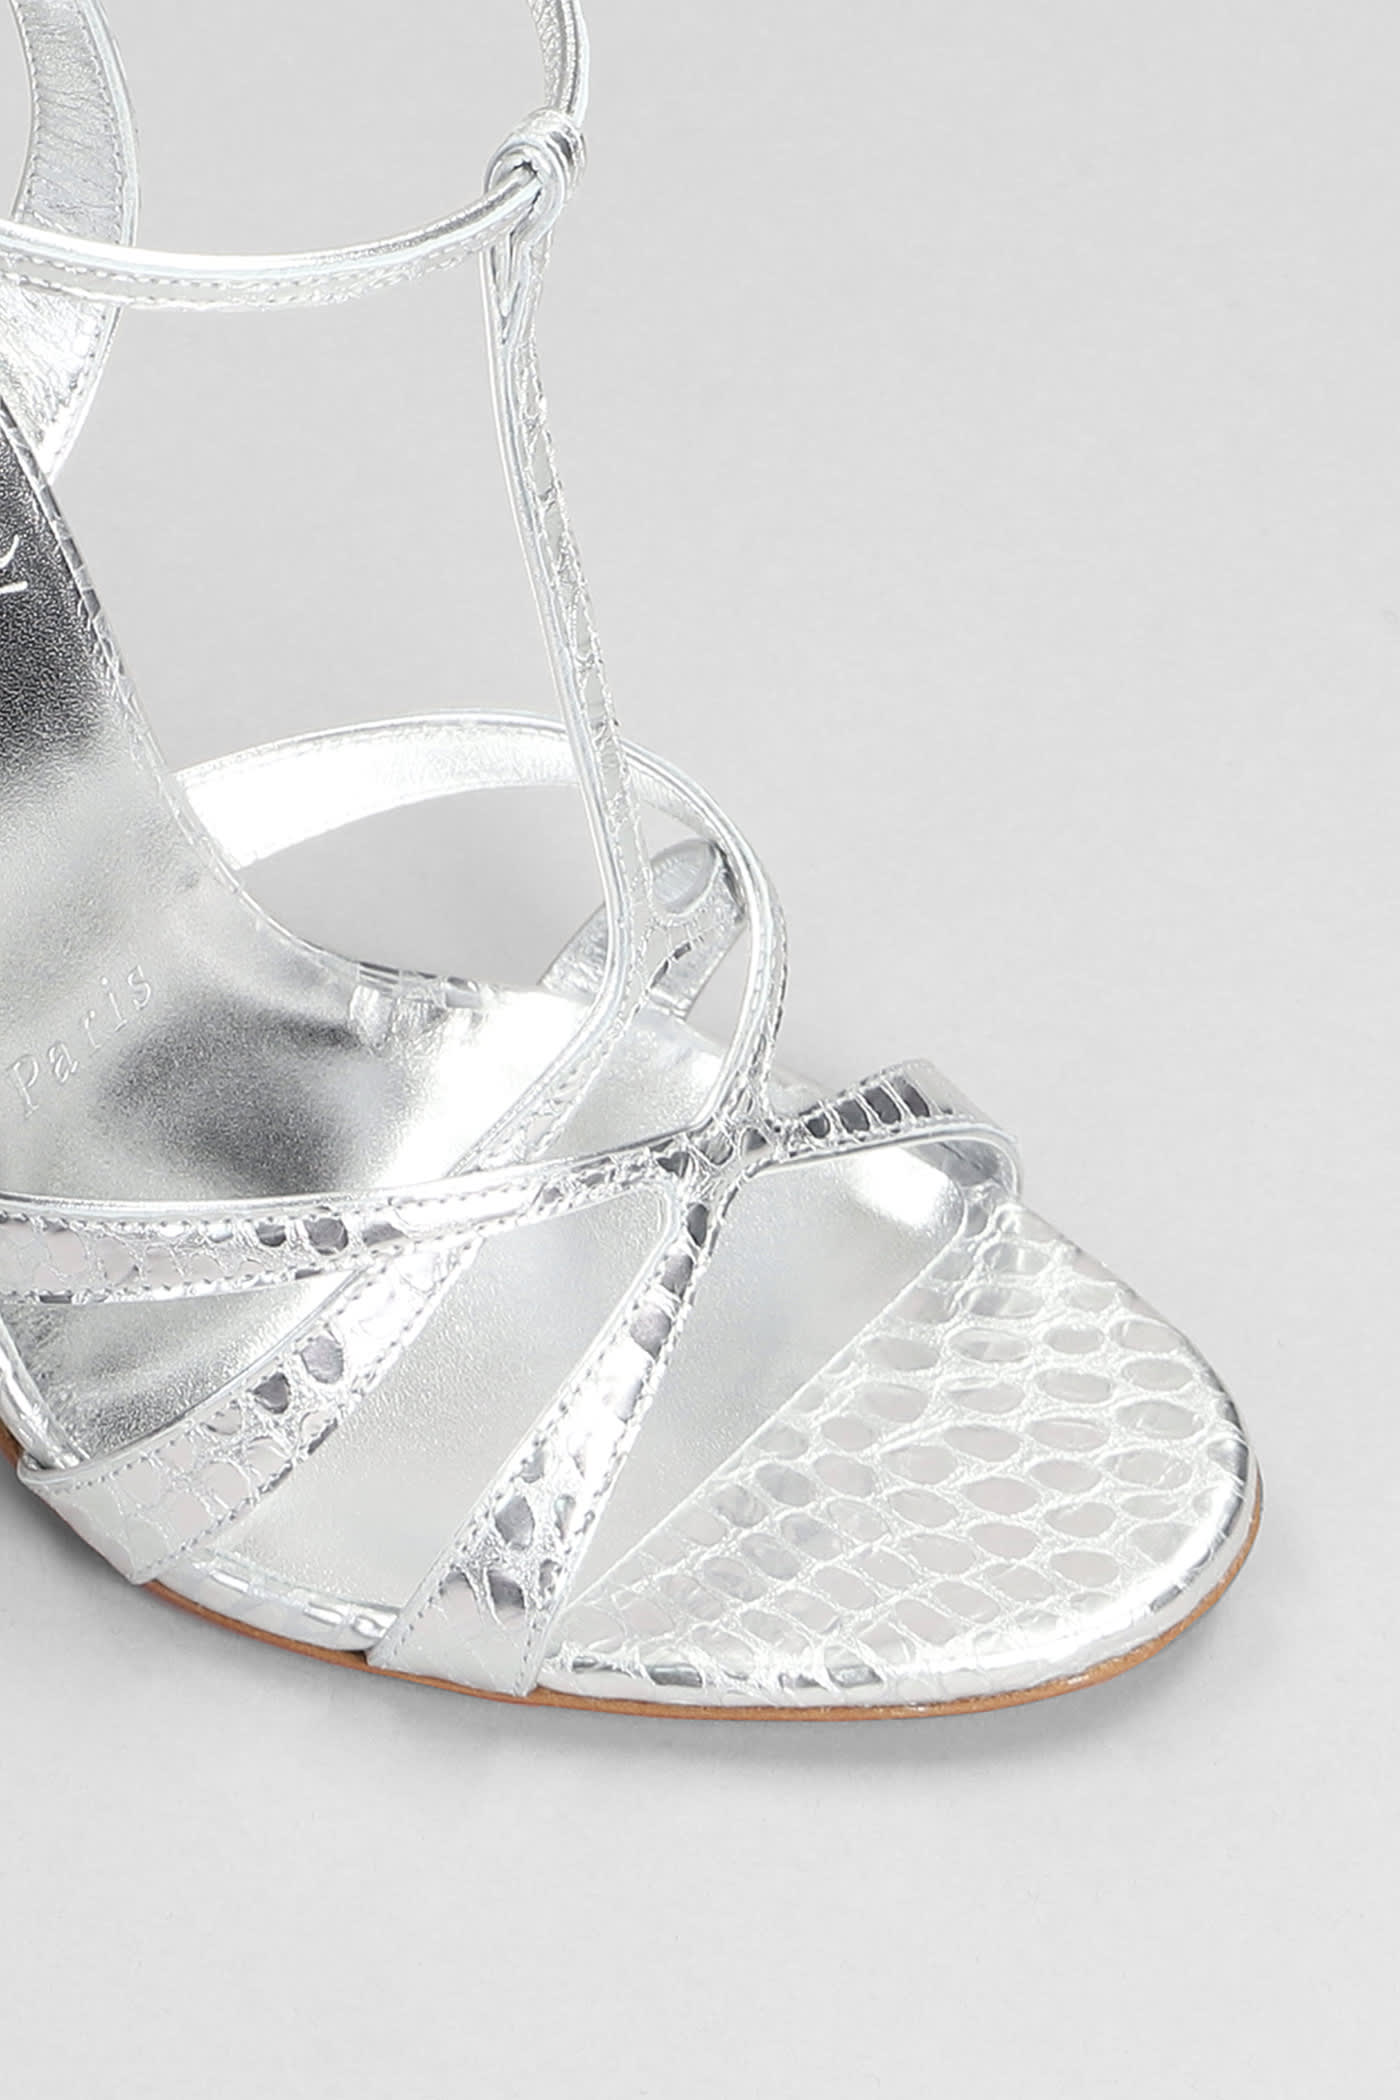 Shop Christian Louboutin Tangueva 100 Sandals In Silver Leather